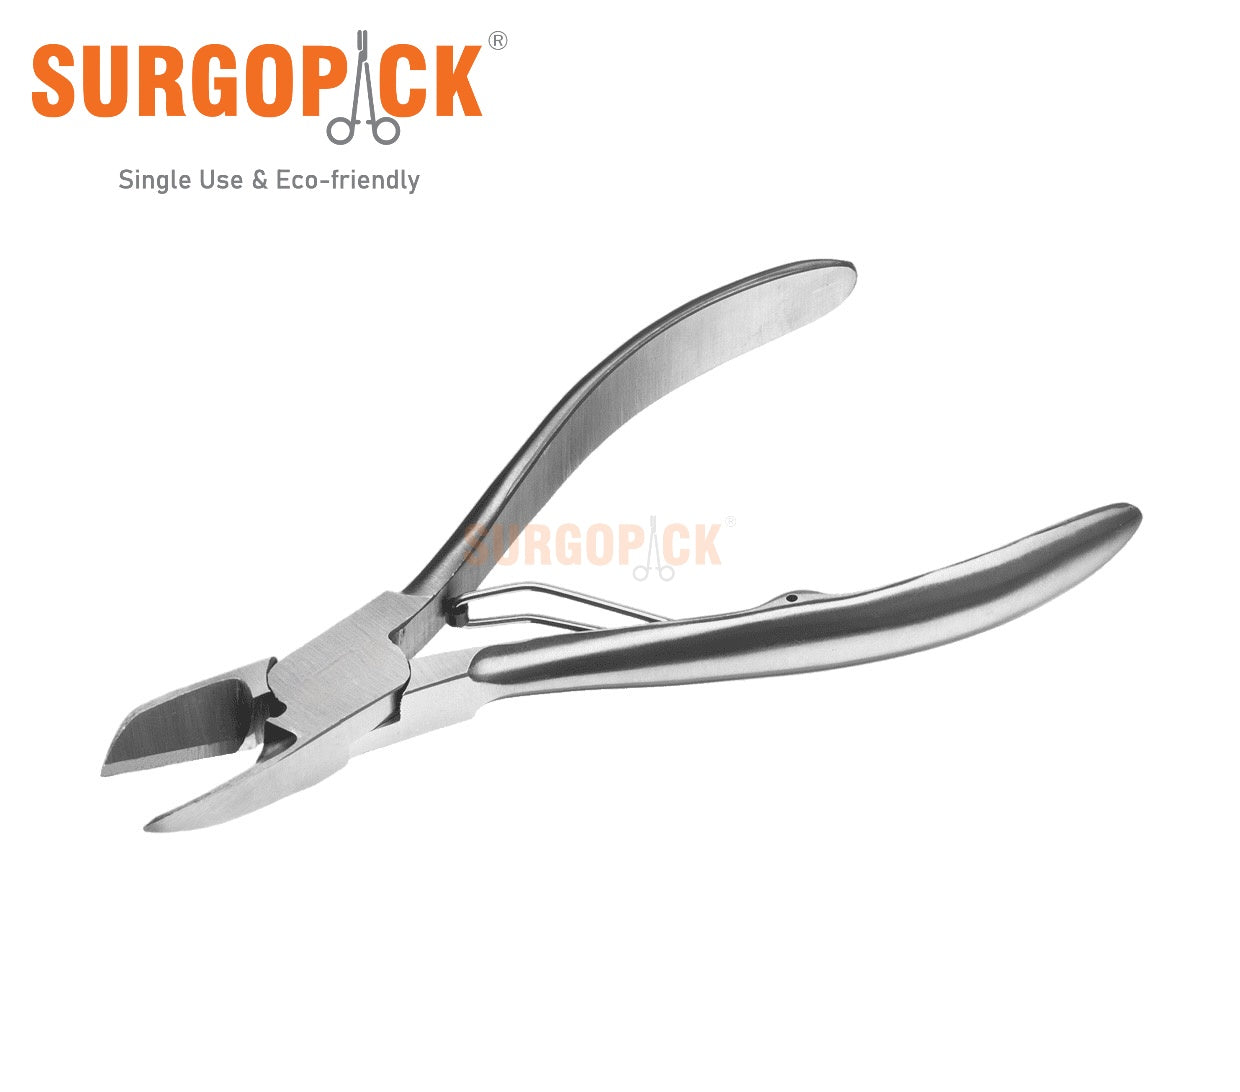 Box 20 Surgopack® Sterile Single Use Podiatry Nail Cutter Nipper Curved Roller Spring 14cm Individually Packed - EmpireMedical 